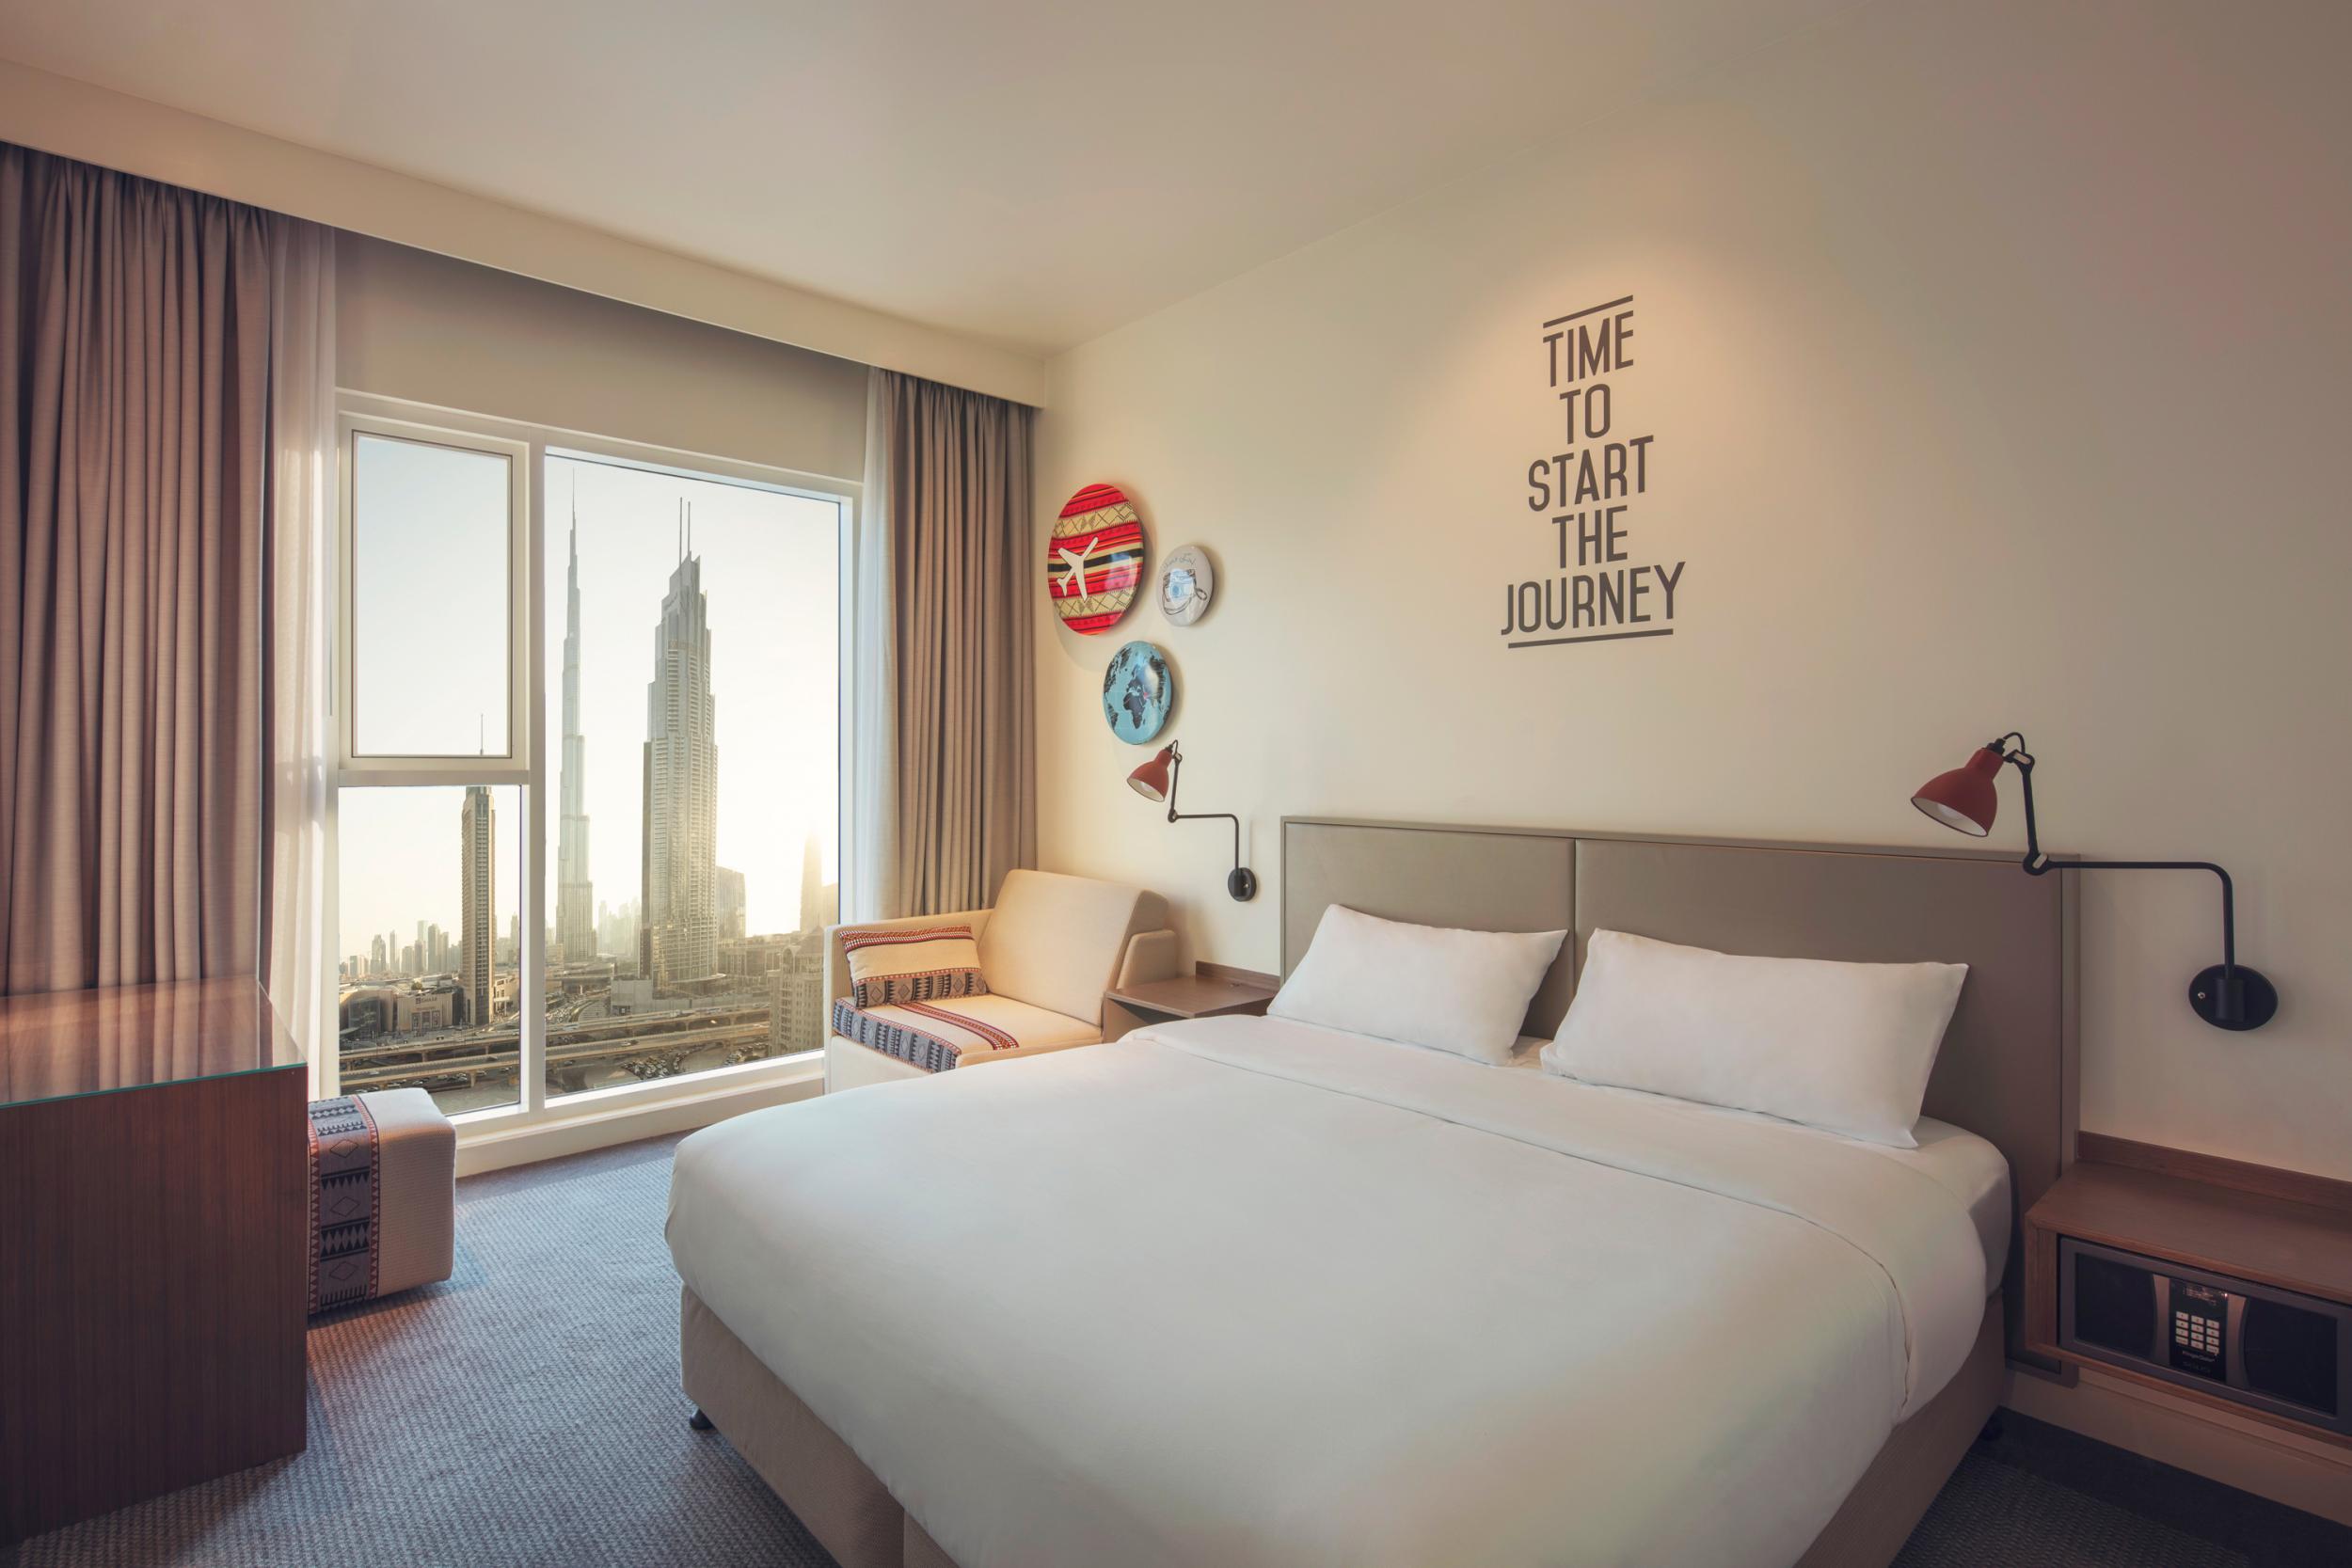 The Rove Downtown offers some exceptional views of the Burj Khalifa